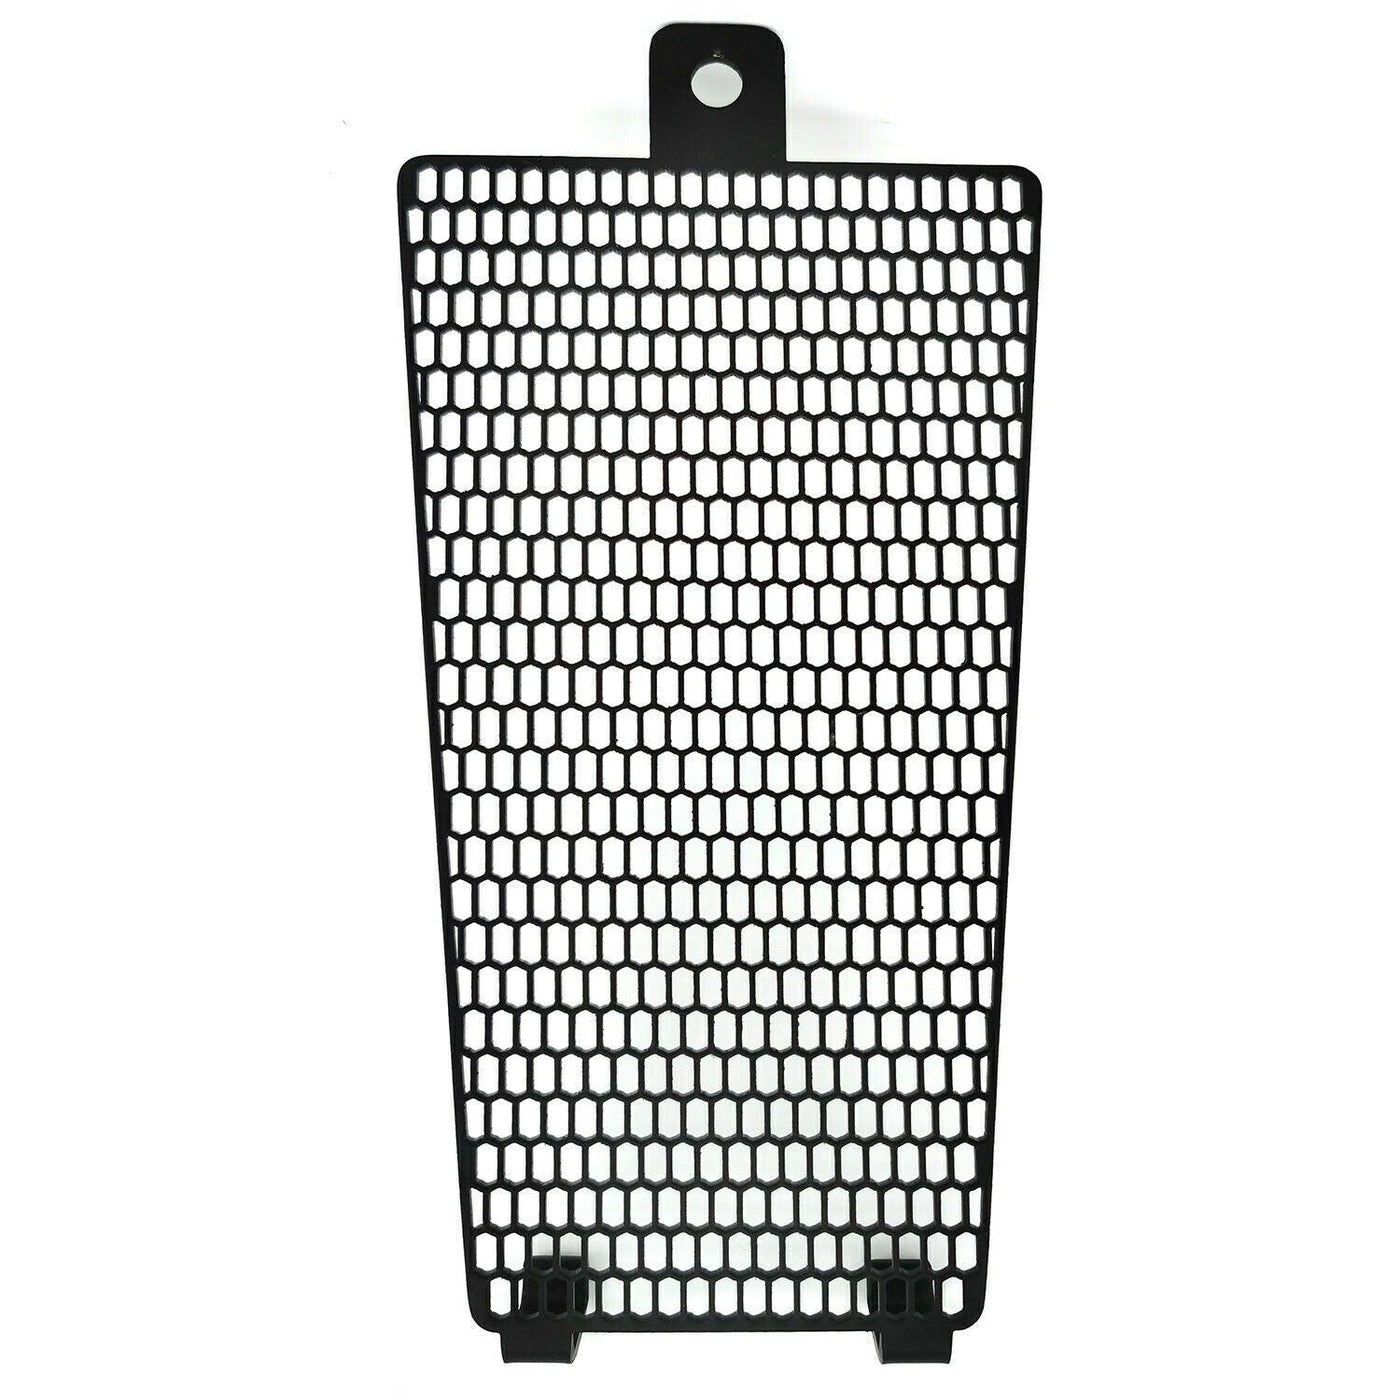 Radiator Guard Grill Net Protector For Harley FLSB Sport Glide 2018-2021 - Moto Life Products